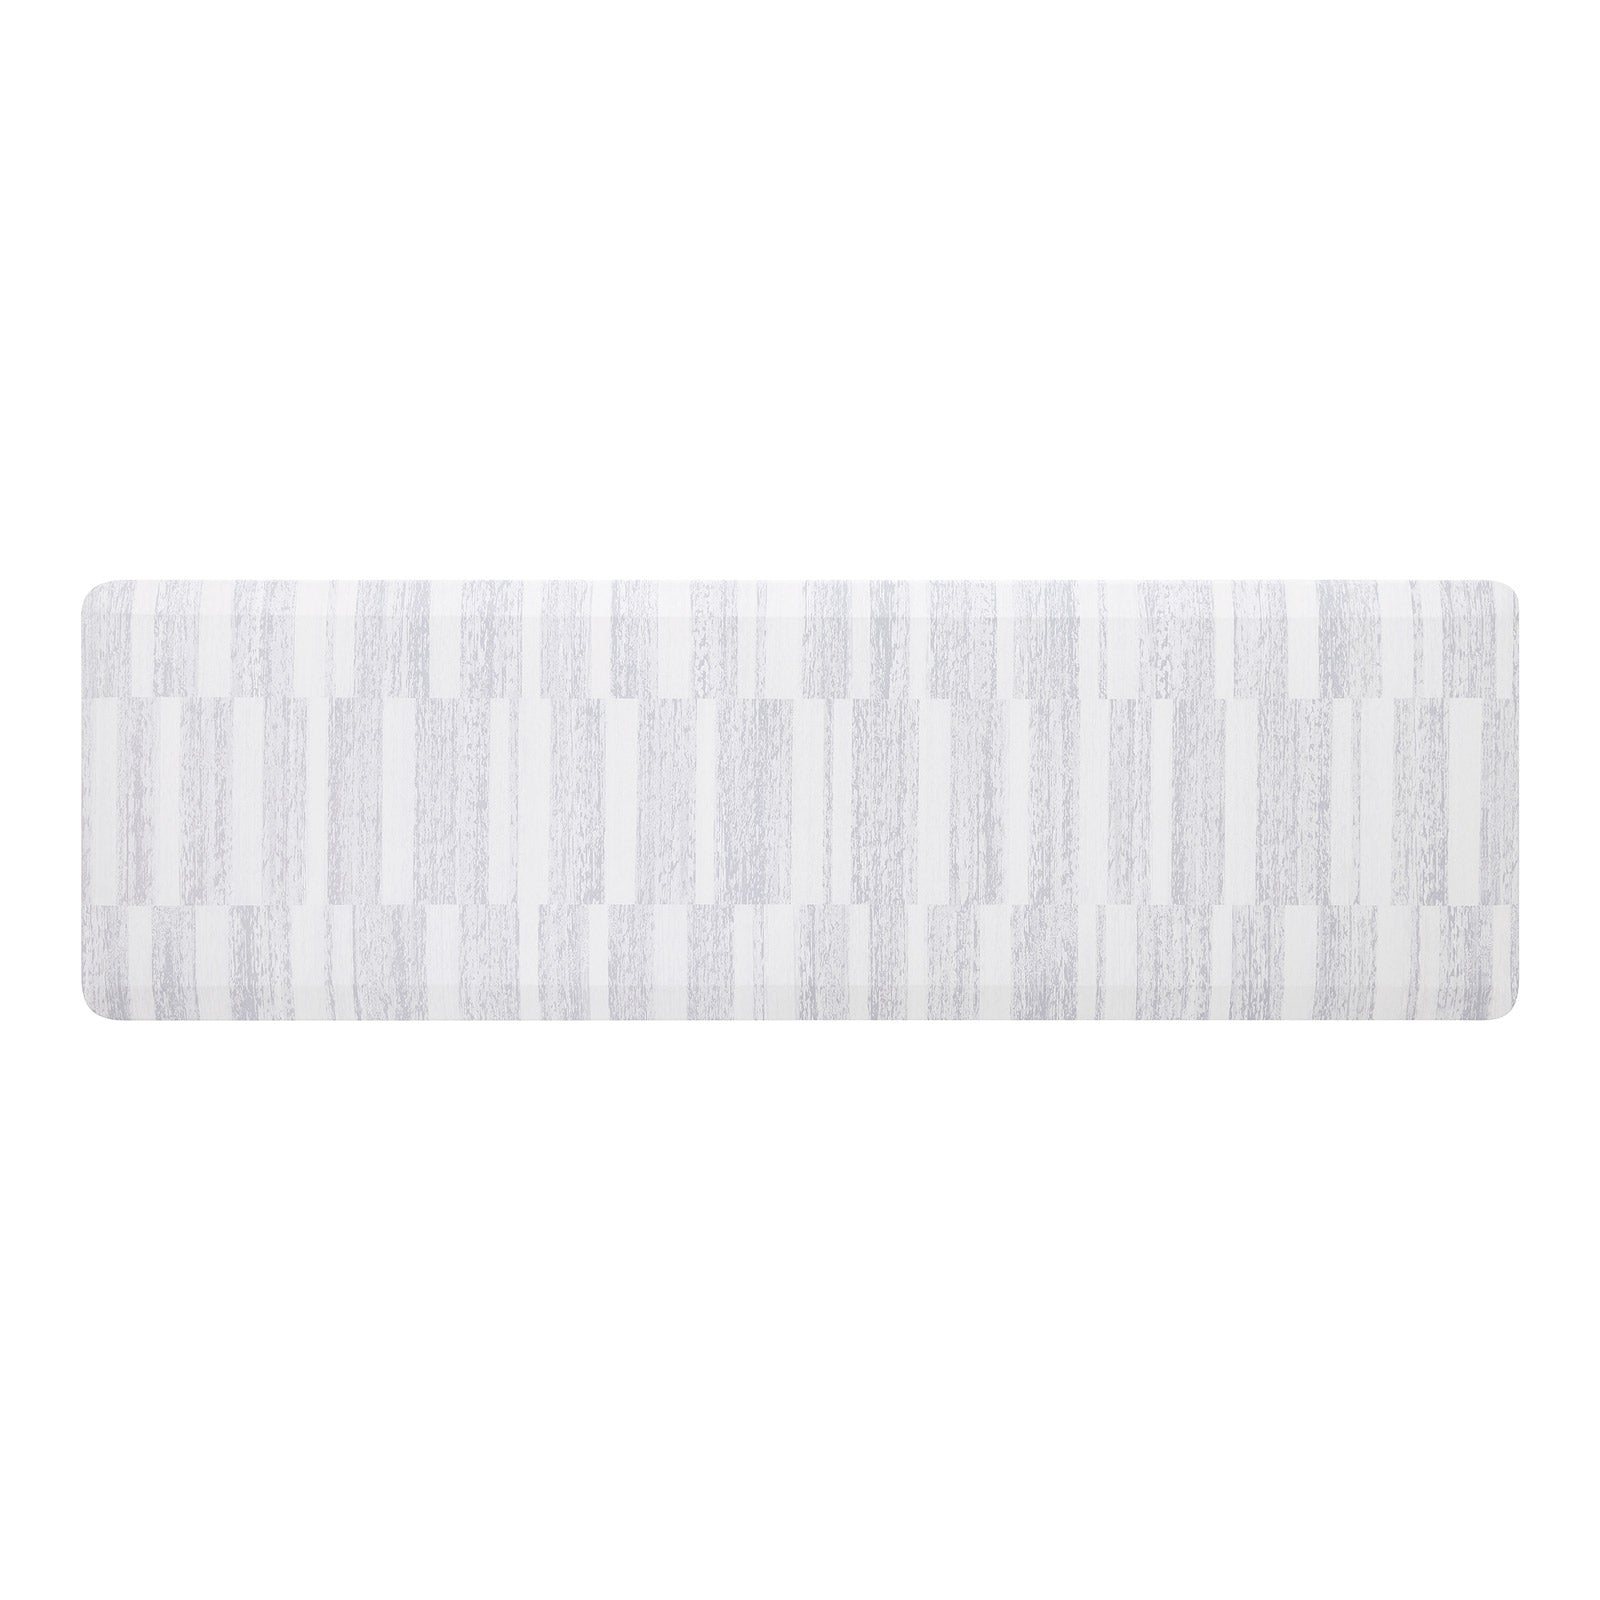 Overhead image of sutton stripe heather gray and white inverted stripe standing mat shown in size 22x72